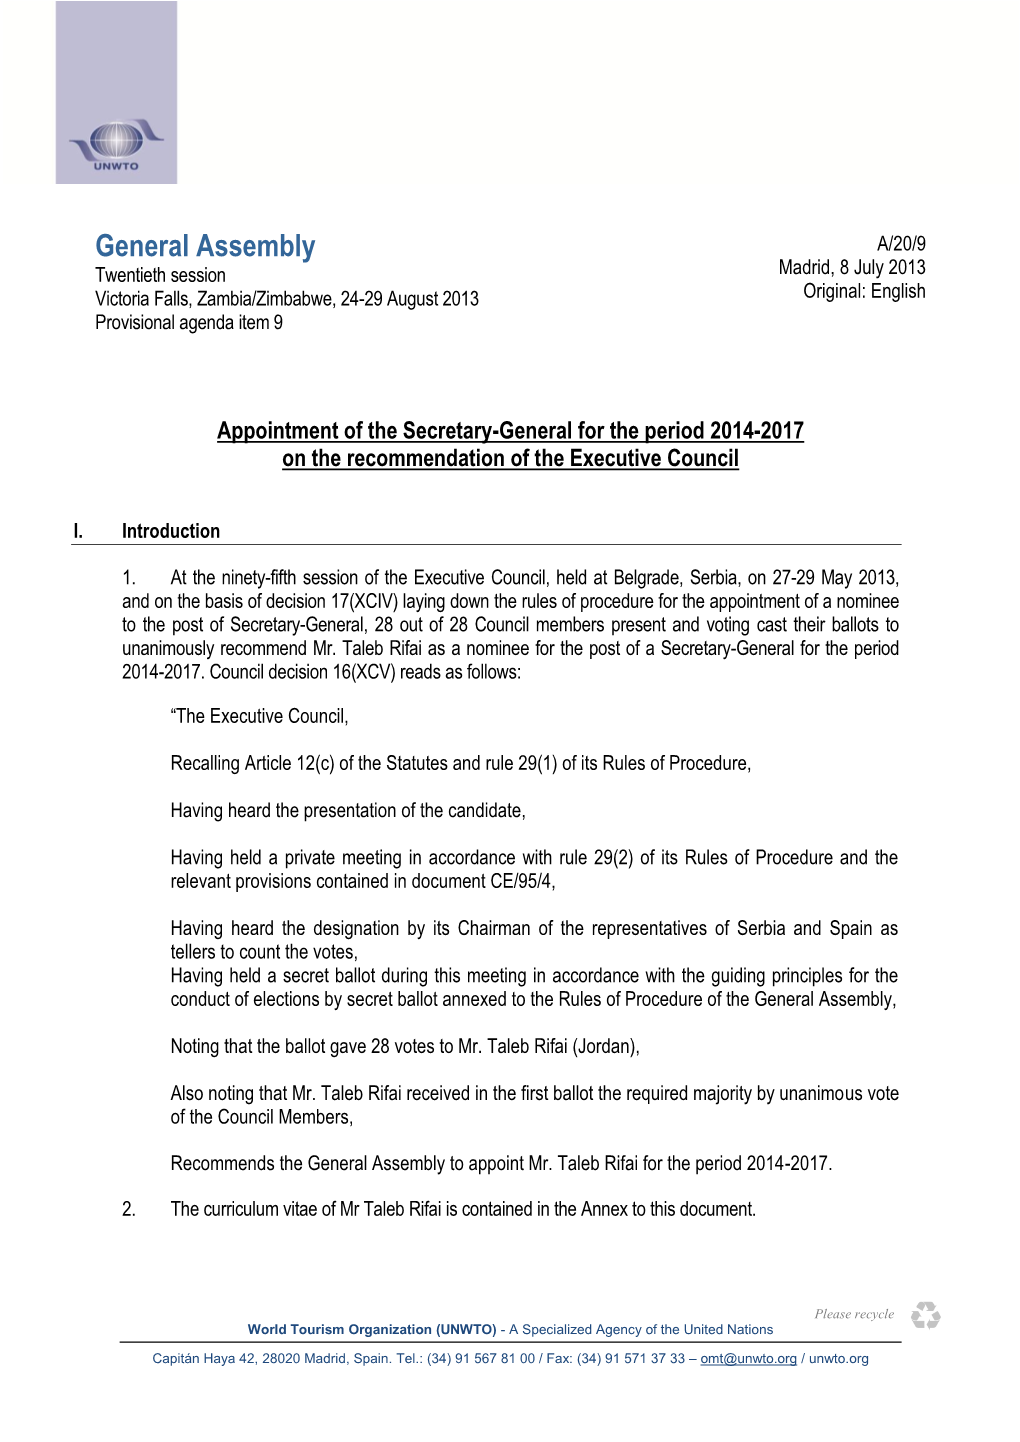 9. Appointment of the Secretary-General